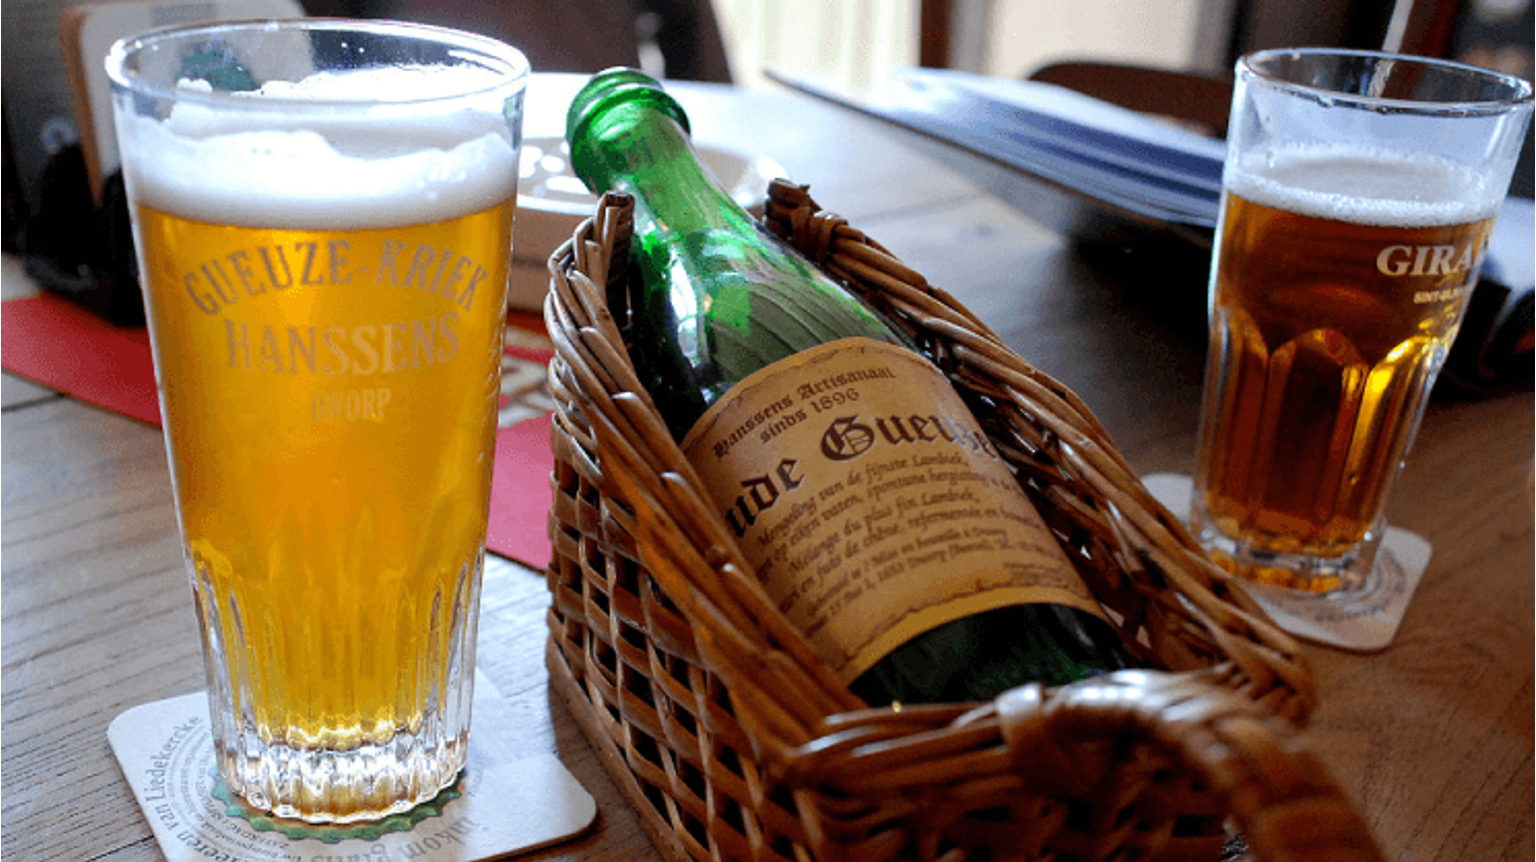 thumbnail for blog article named: Hanssens Artisanaal, specialist in geuze